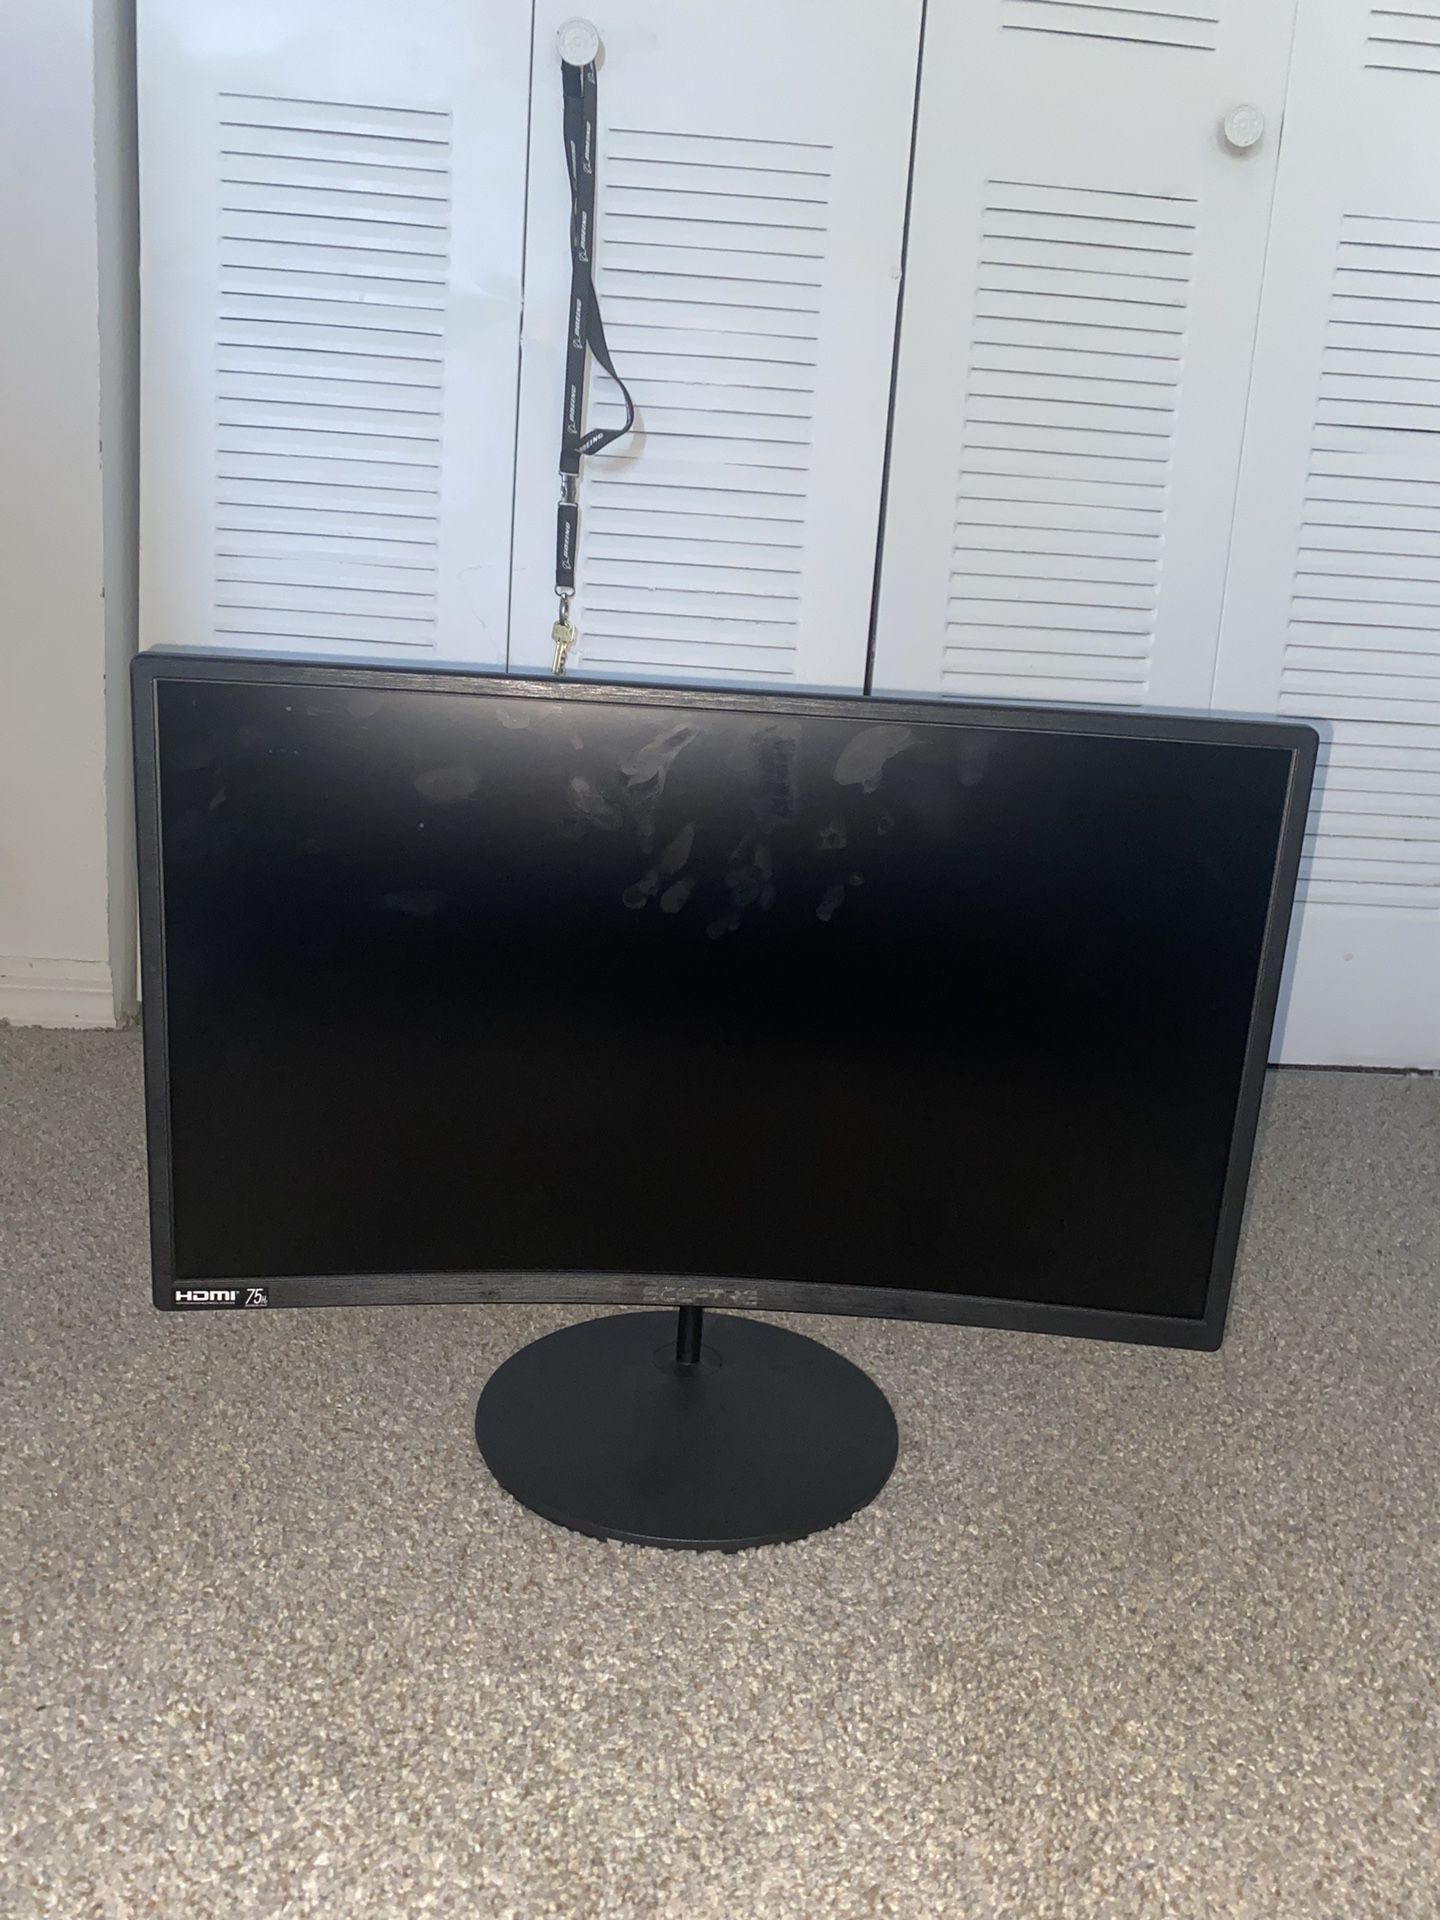 New Sceptre 'Curved' Monitor for Sale in West Palm Beach, FL OfferUp